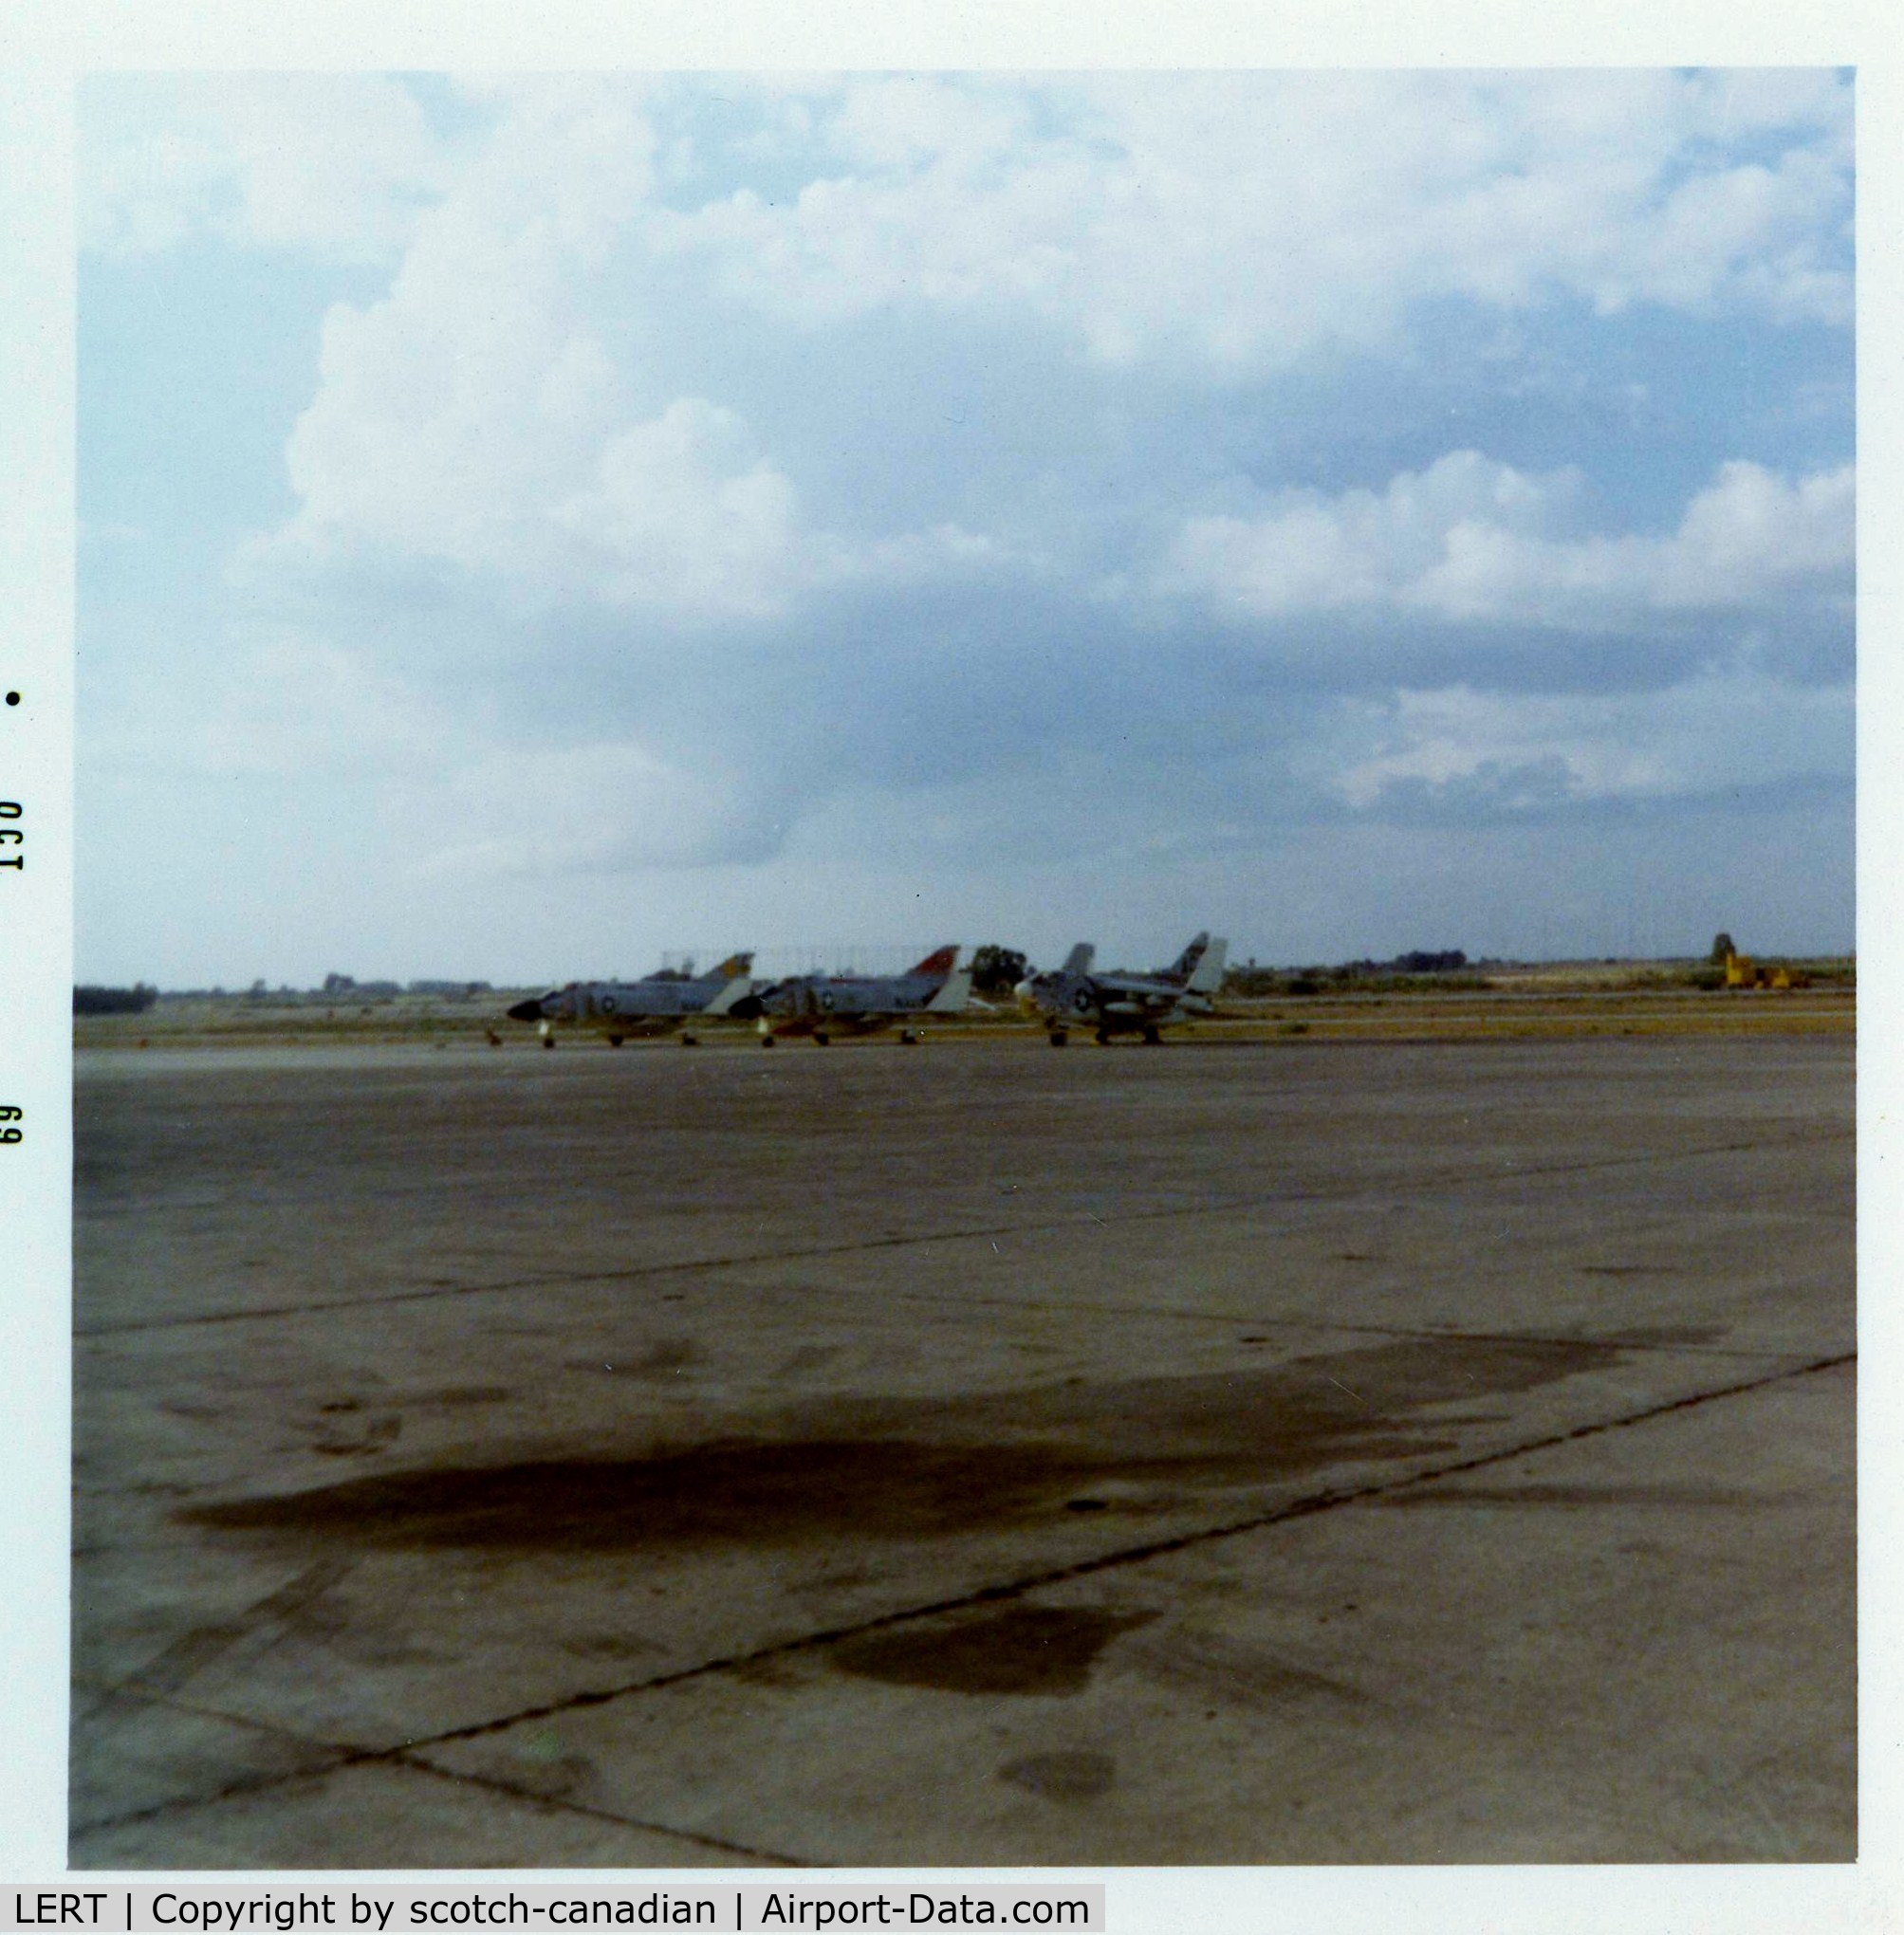 LERT Airport - Aircraft on the Flight Line at Naval Air Station, Rota, Spain